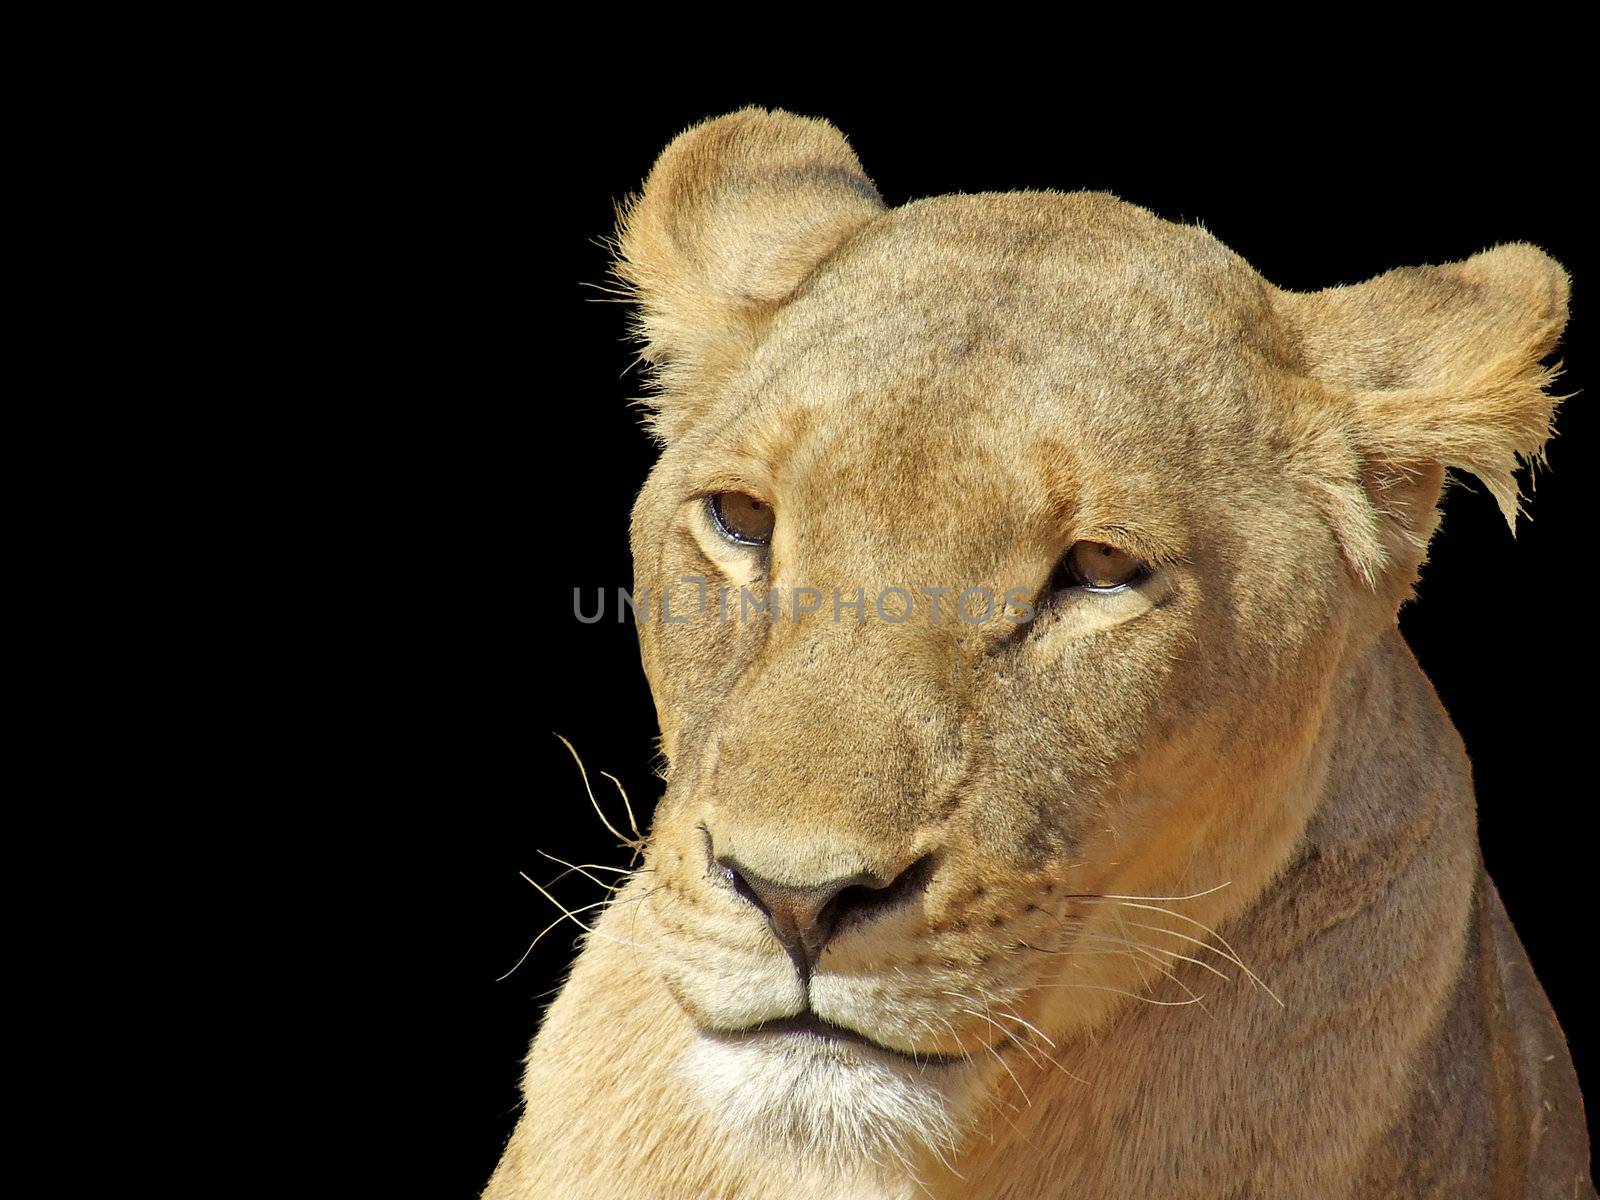 Lioness on black by ChrisAlleaume